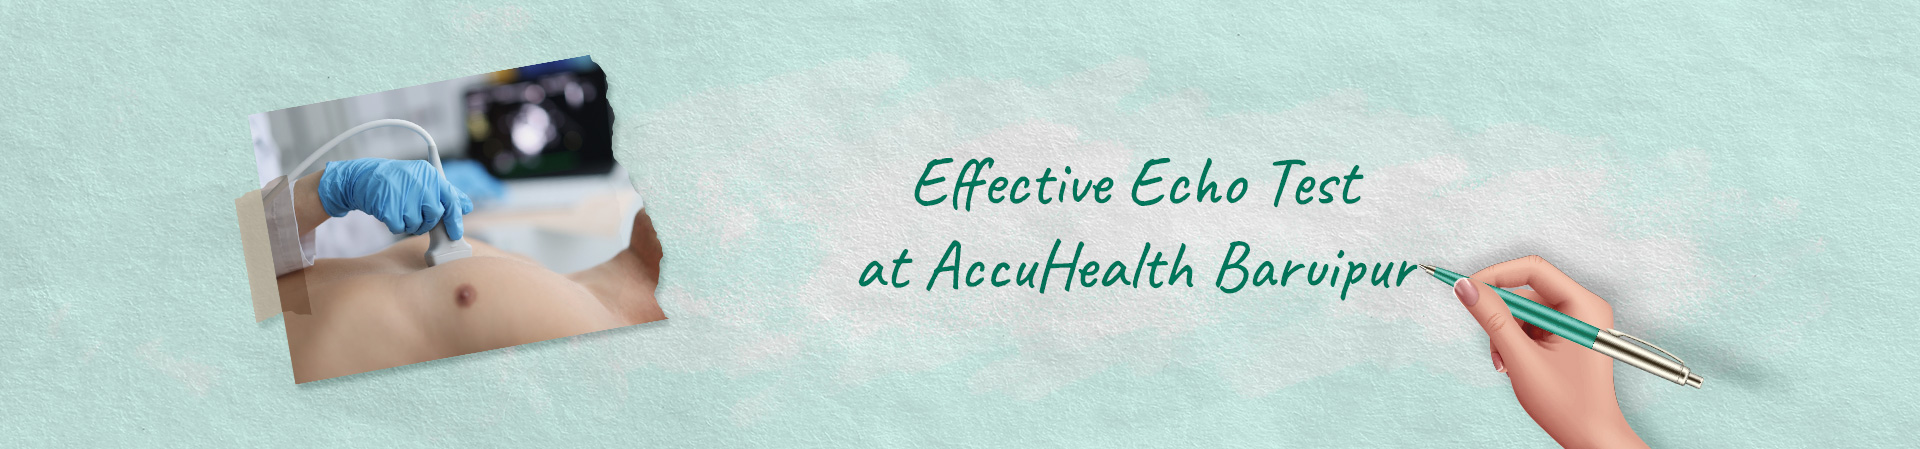 Echo Test in AccuHealth Baruipur: Key Things About a Test That Gets to Your Heart